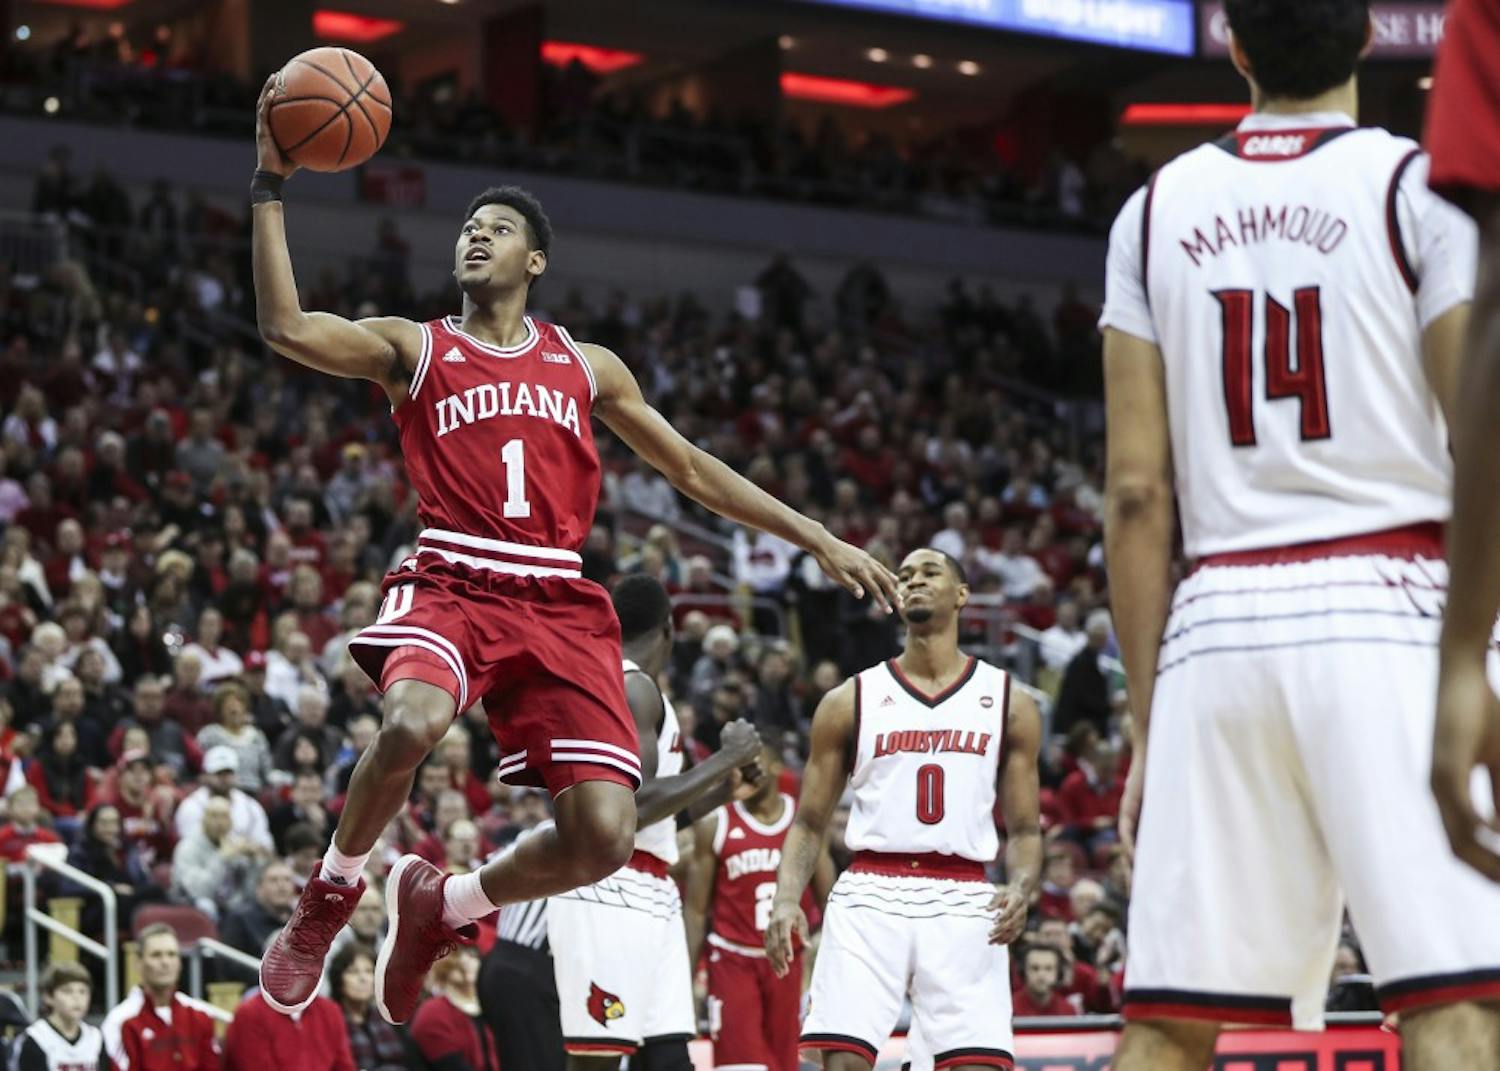 GALLERY: Hoosiers lose to the Louisville Cardinals, 71-62